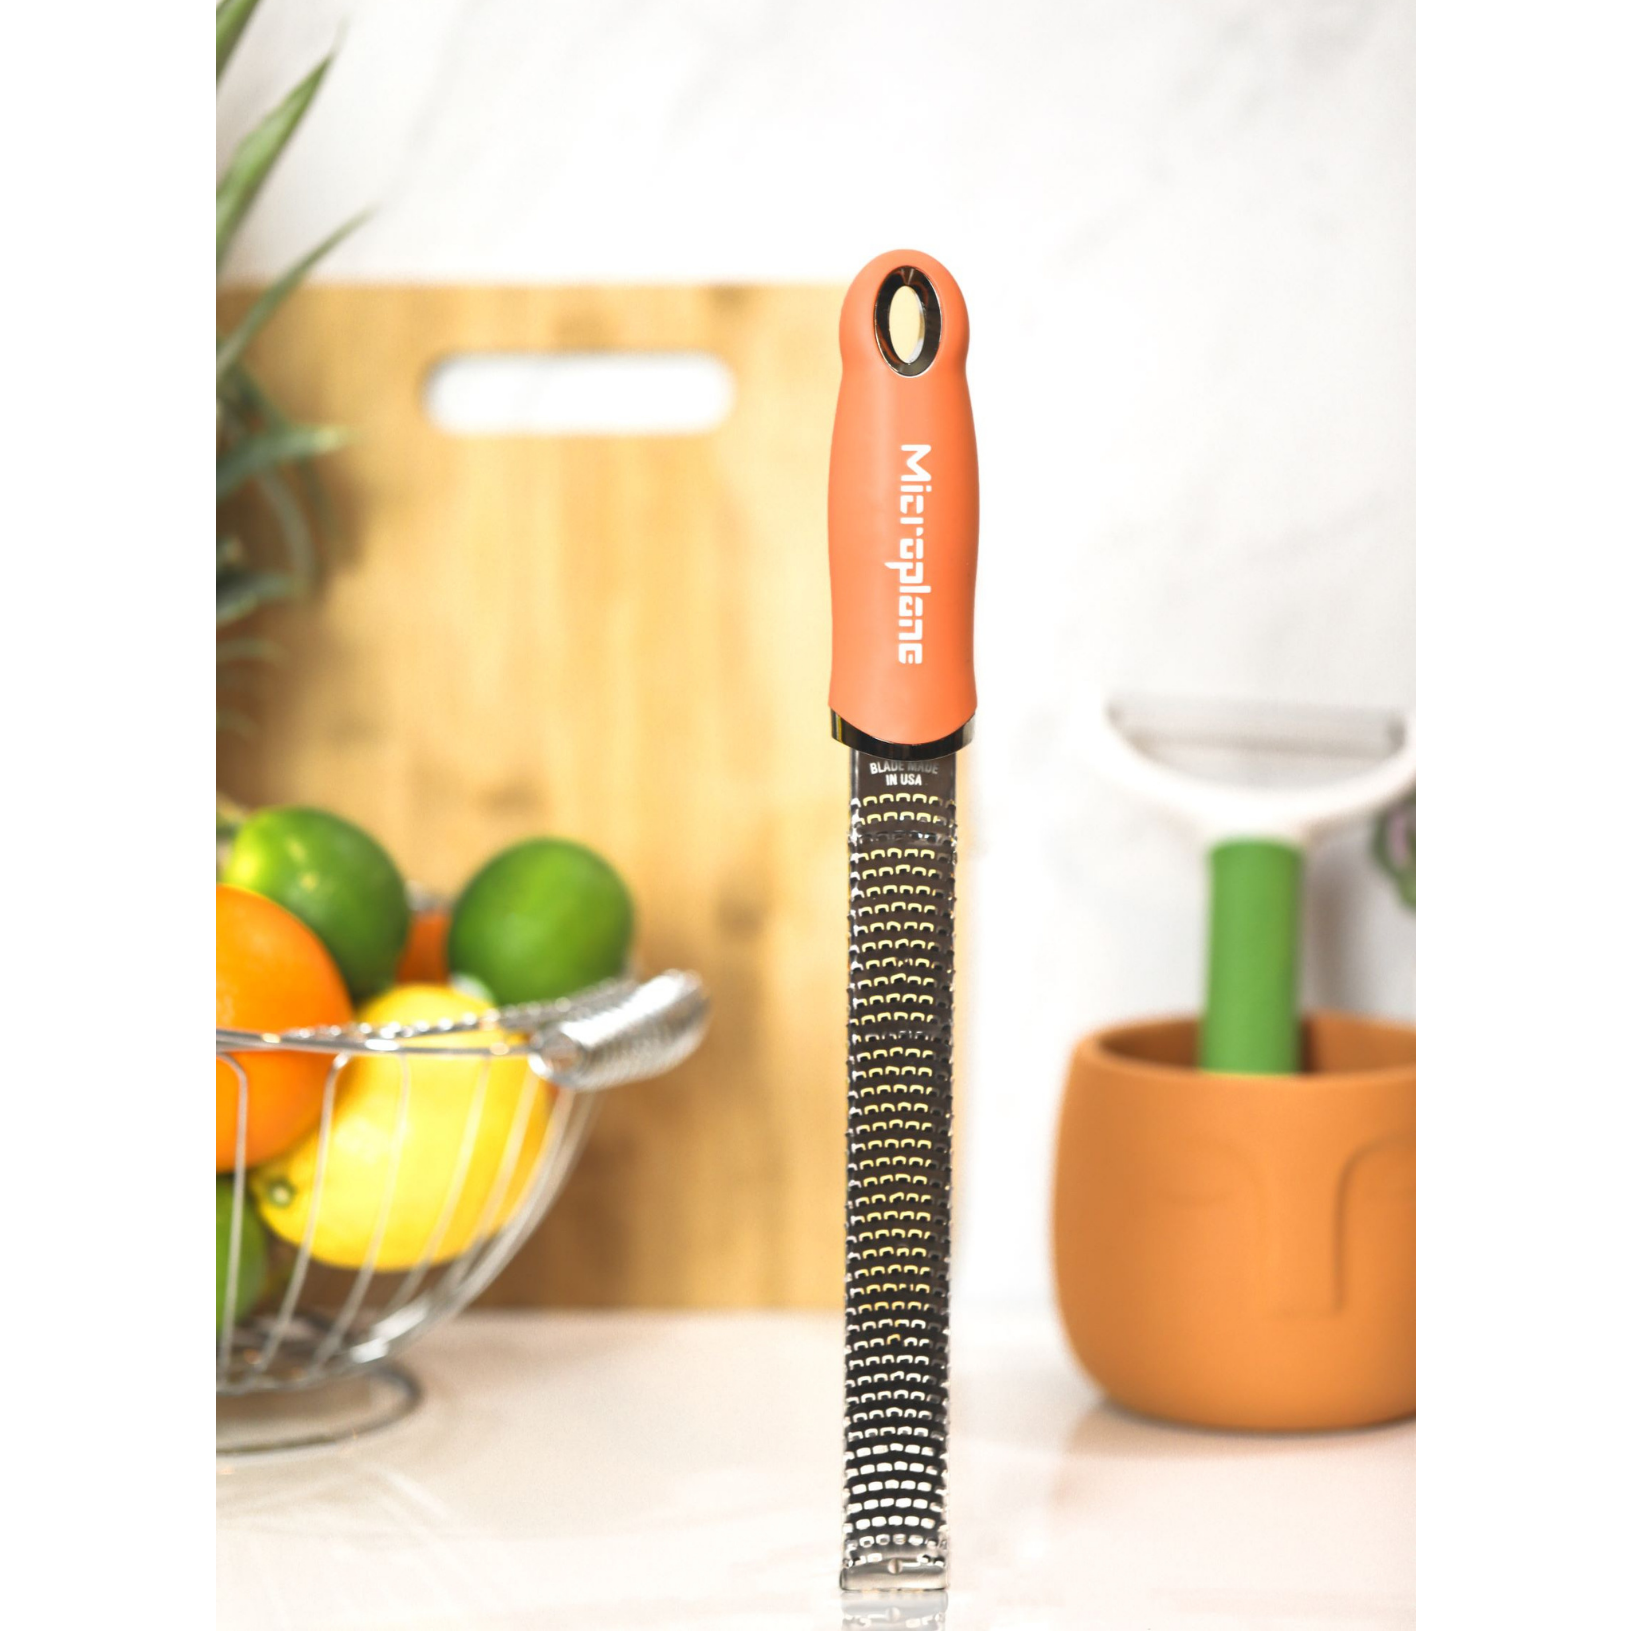 Microplane Premium Zester Grater in After Dark Gray | Lemon Zester tool,  Hard Cheese & Vegetable Grater | For Citrus, Parmesan Cheese, Garlic,  Ginger